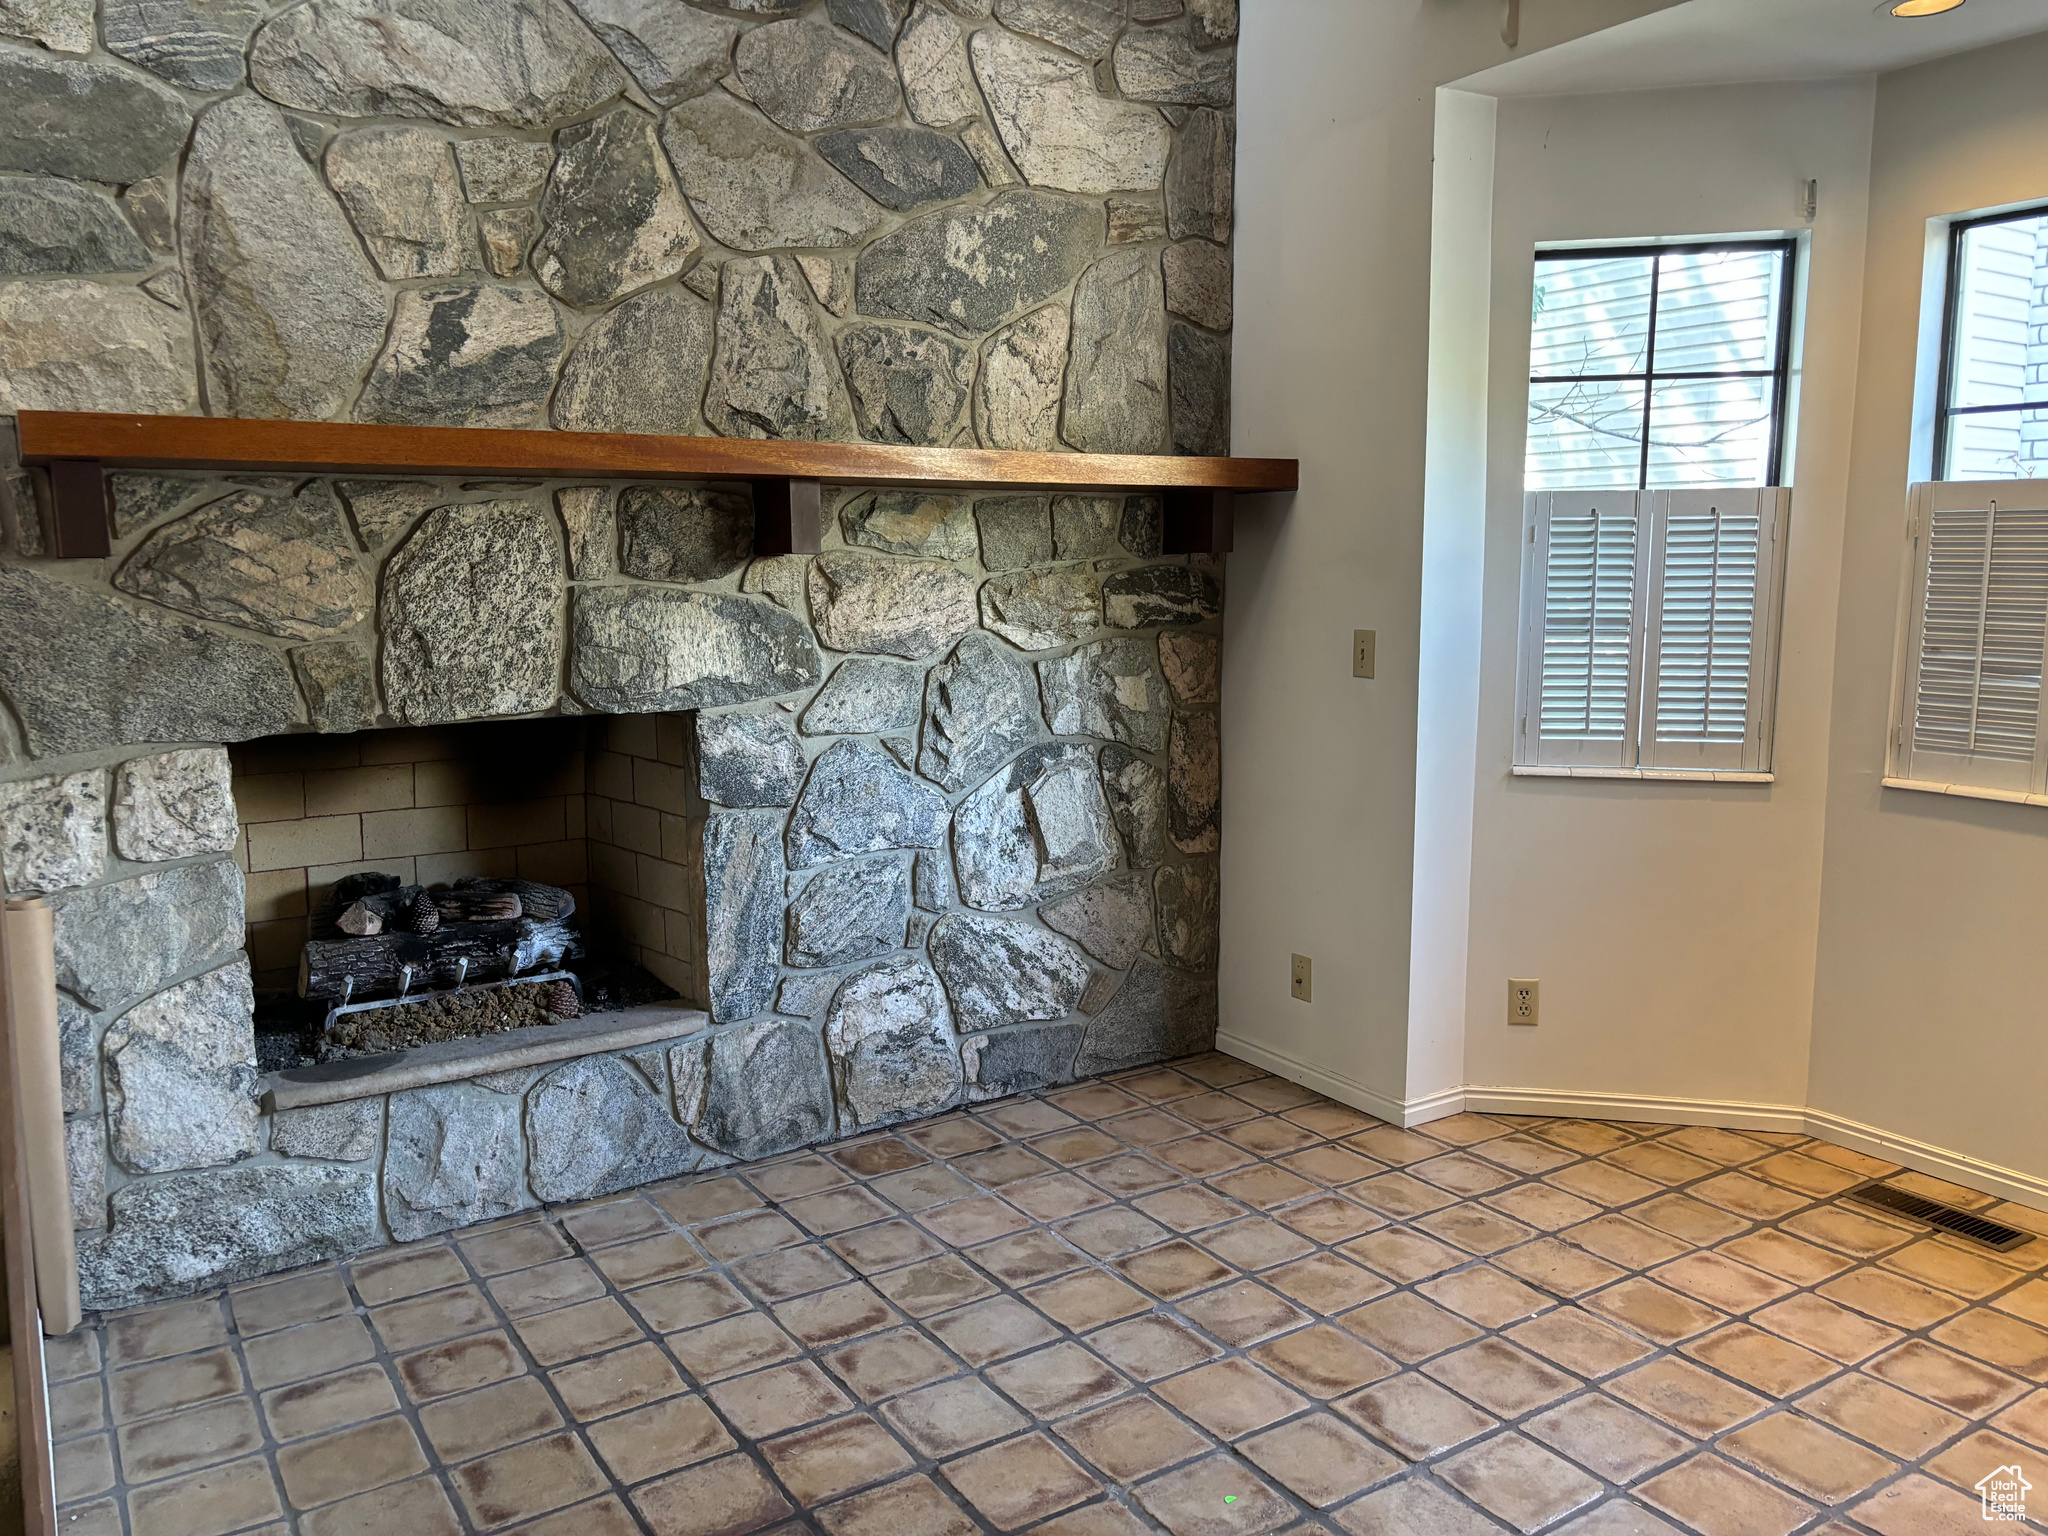 BEAUTIFUL GAS FIREPLACE RIGHT NEXT TO THE DINING AREA!